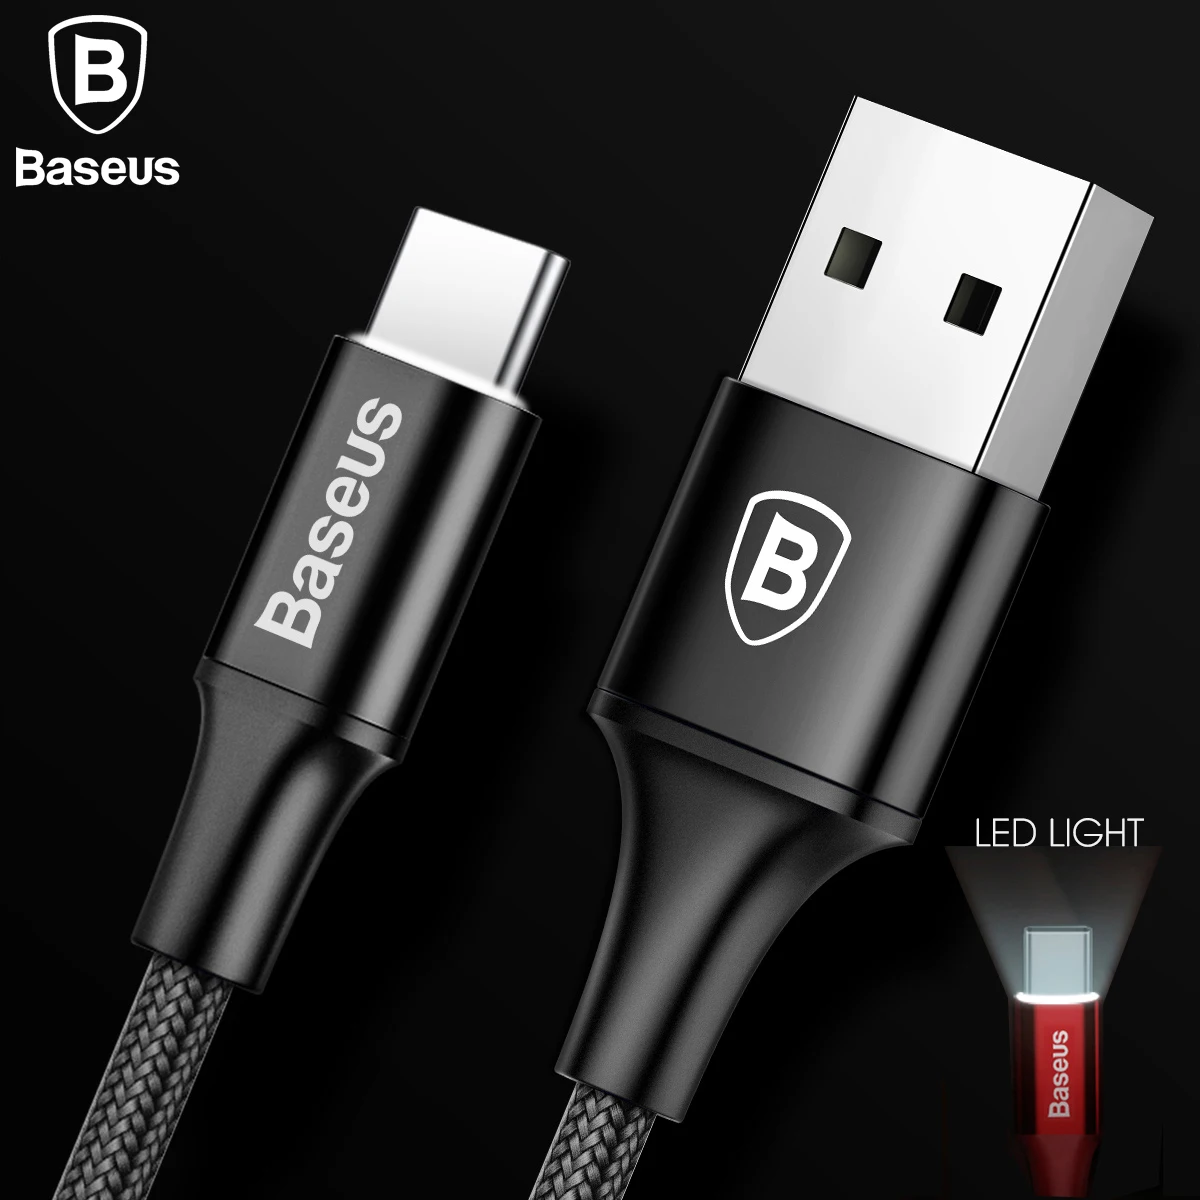 Image Baseus USB Cable For Samsung S8 USB Type C Charger Cable For Huawei Mate9 10 P9 10 Xiaomi Mobile Phone Cable 2A Type C Cable